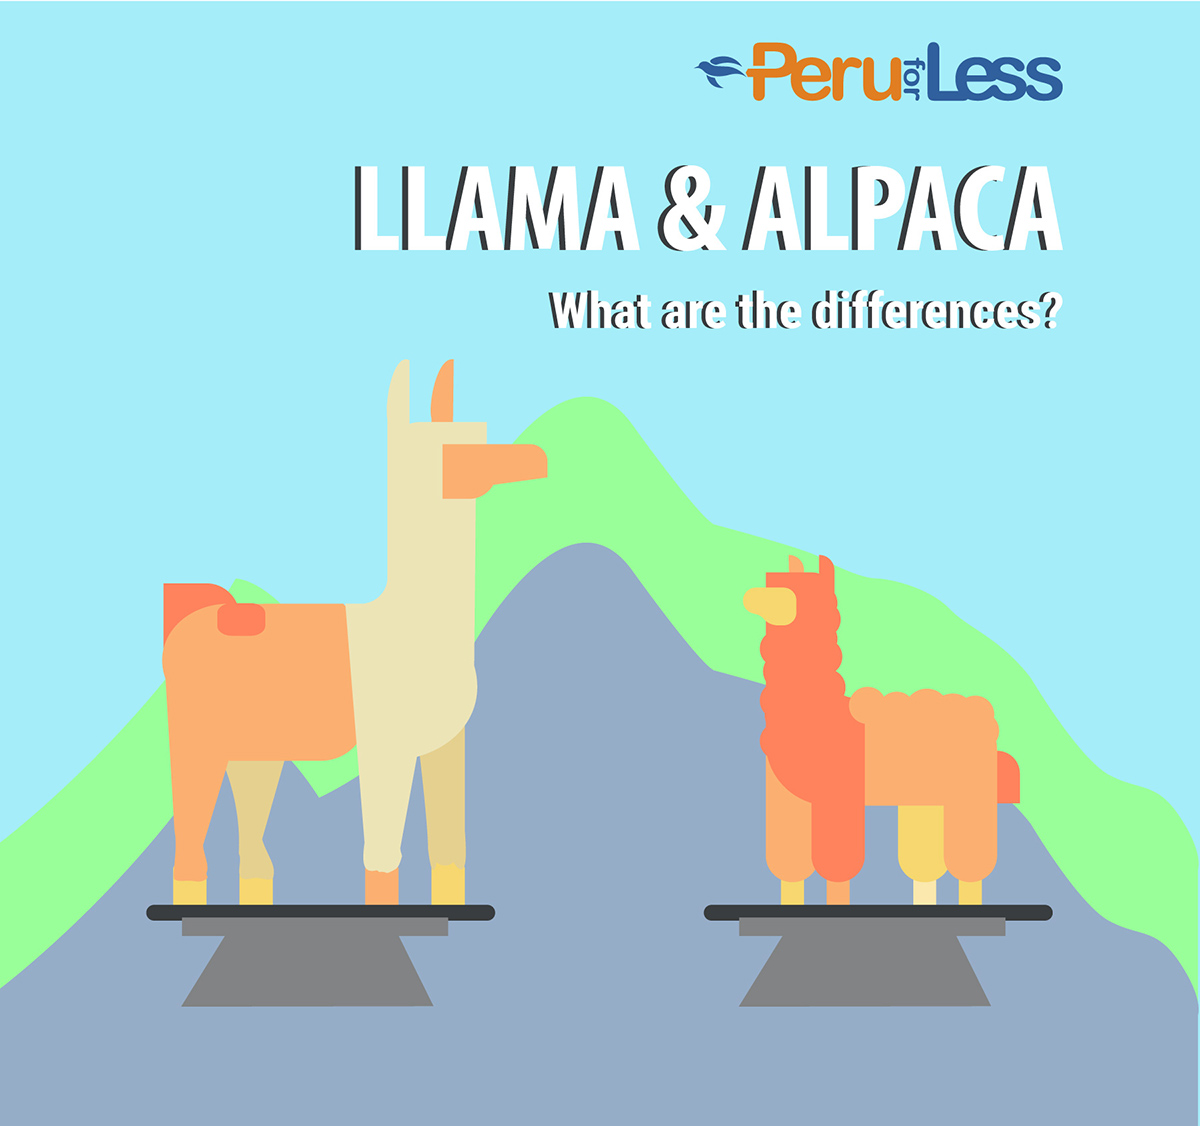 A graphic with a llama and alpaca showing the difference in size, face shape, and ear shape.